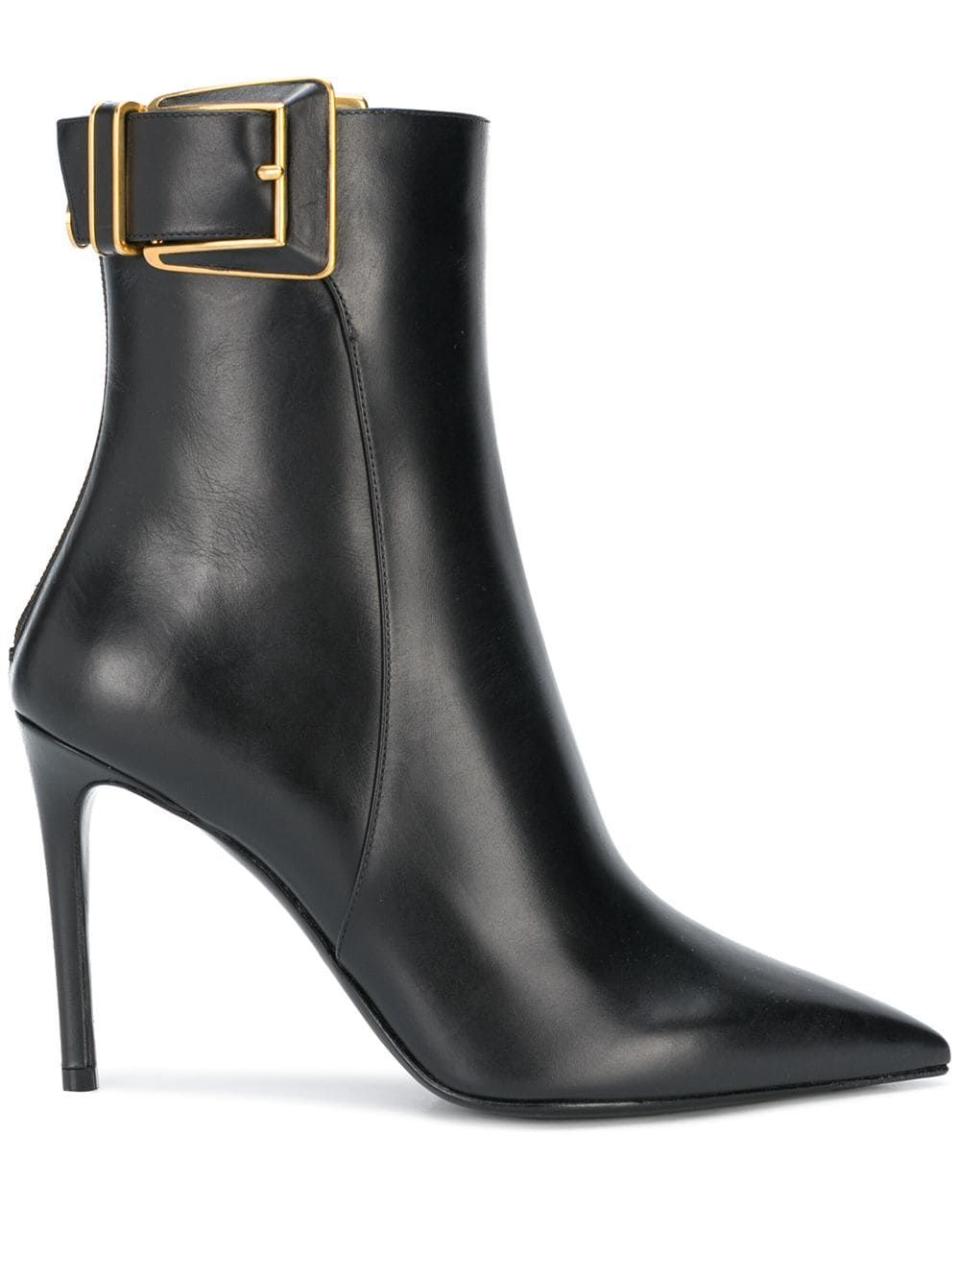 Shop the Look: Leather Ankle Boots